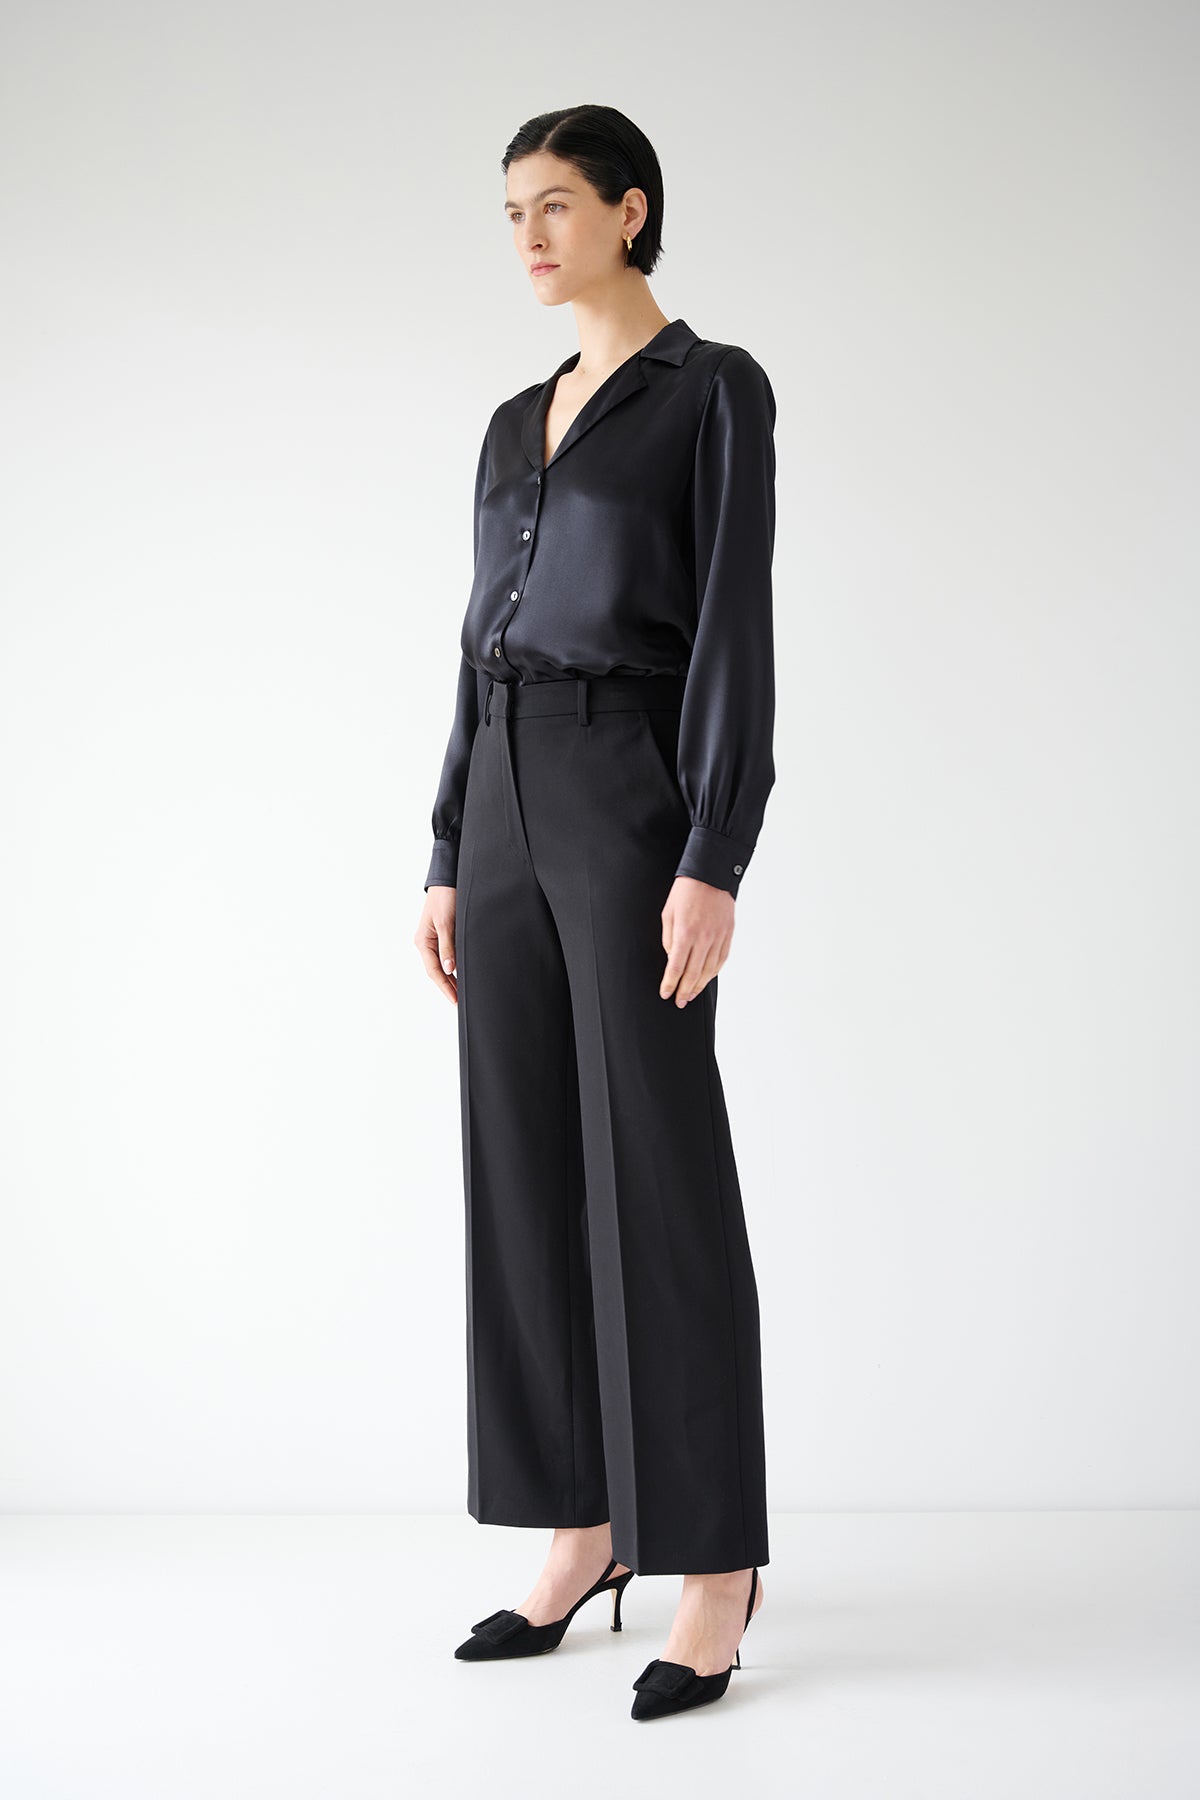 The model is wearing PRINCE PANT by Velvet by Jenny Graham, black straight-leg trousers with pleats, and a black blouse.-35547456635073